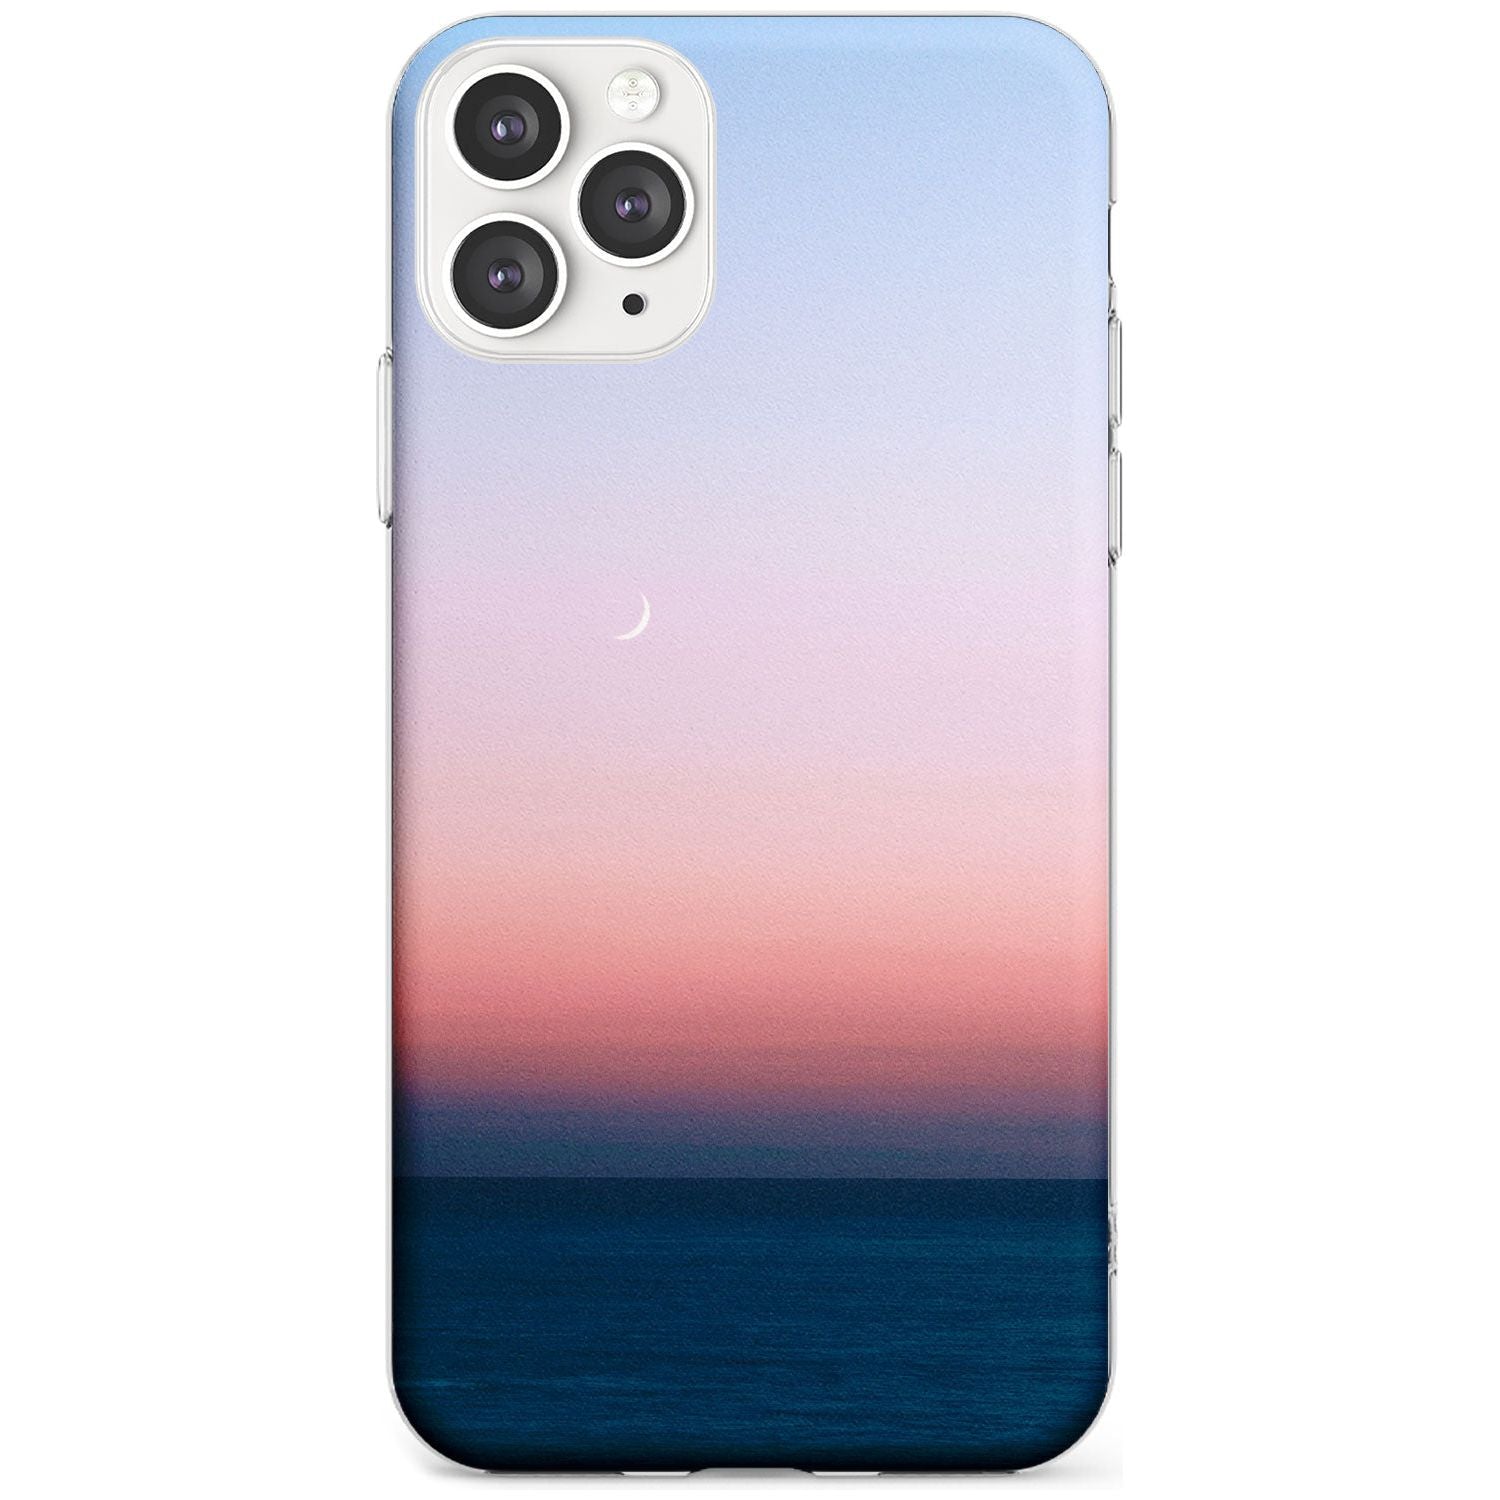 Sunset at Sea Photograph Slim TPU Phone Case for iPhone 11 Pro Max